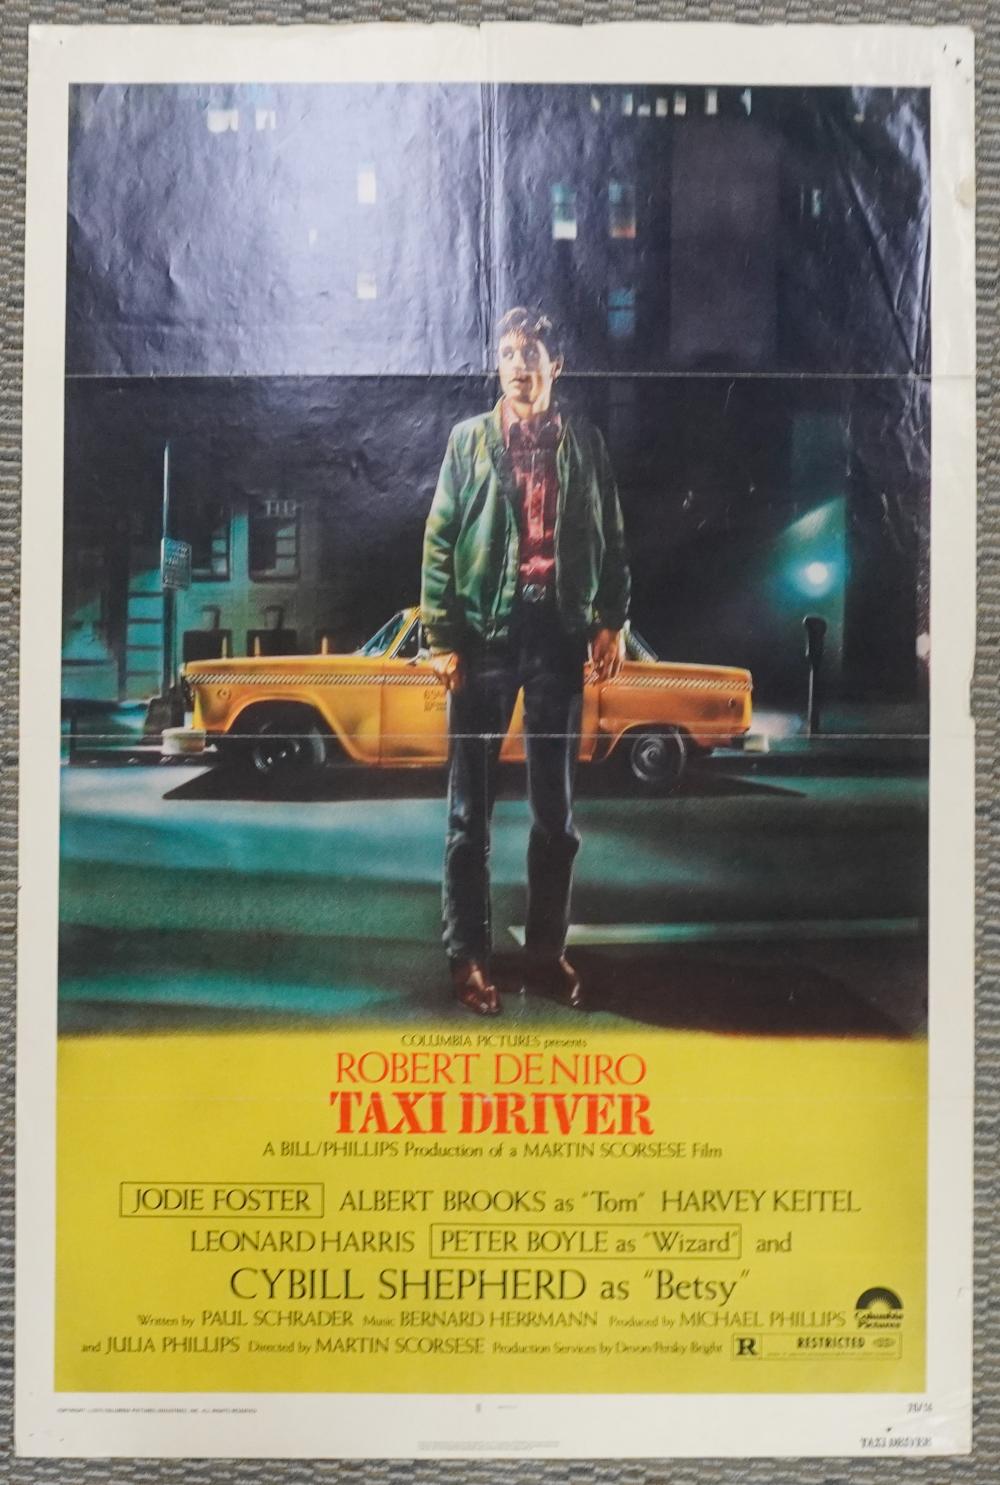  TAXI DRIVER THEATRICAL POSTER  3098c7